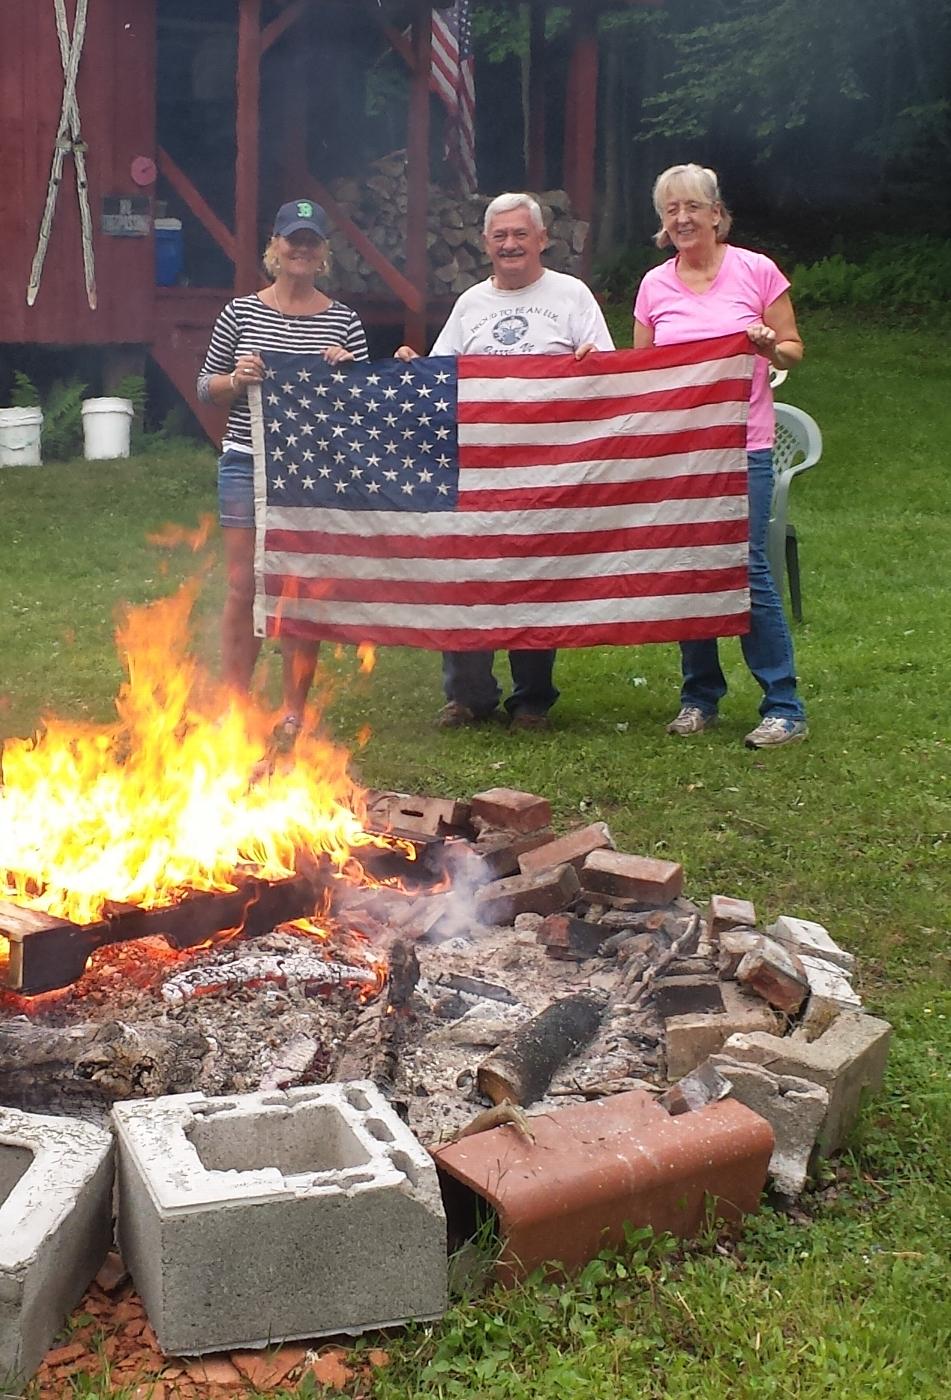 Over 250 worn, tattered flags were properly retired.  Pictured are Maureen Lawson and Chip and Terry Paine